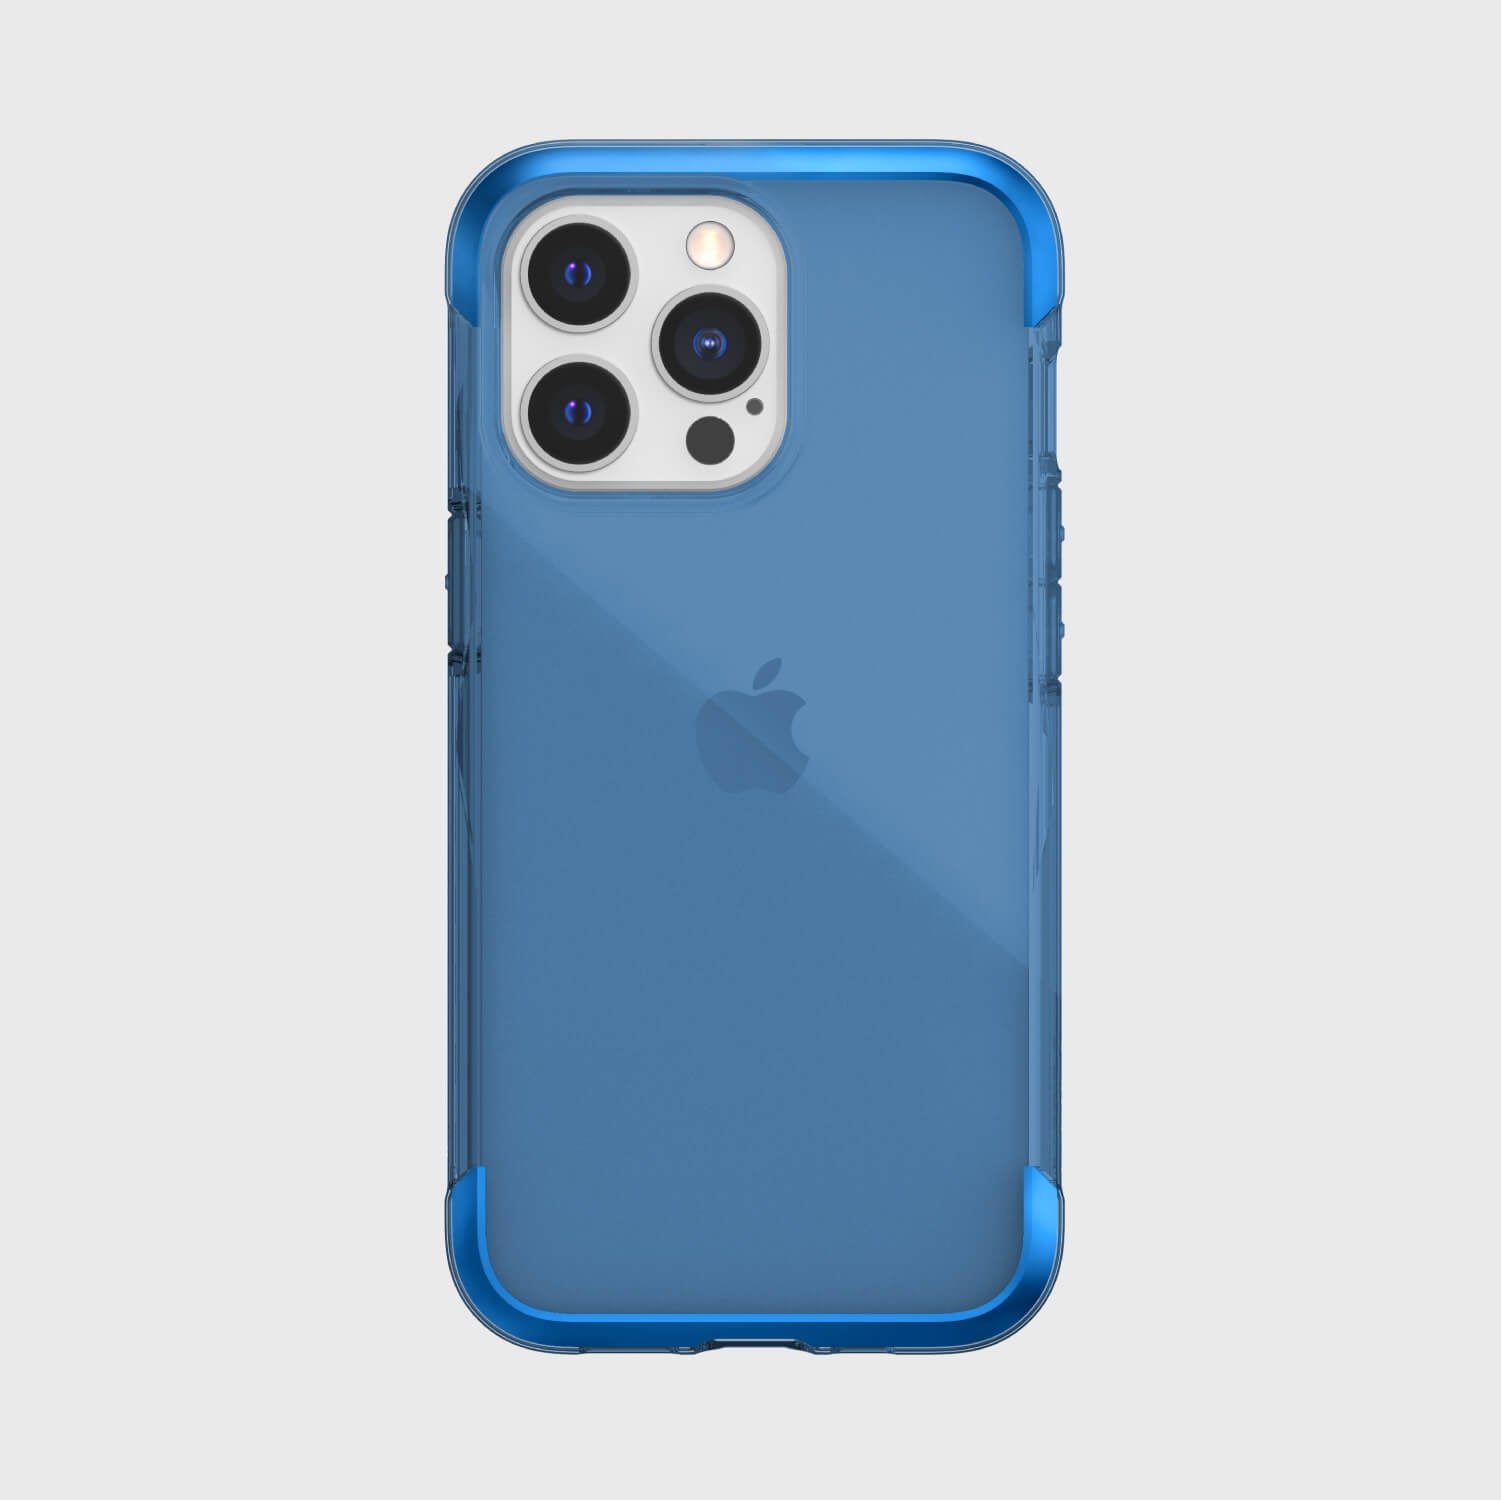 A blue Raptic iPhone 13 Pro Max Case - AIR with four cameras and 13-foot drop protection.